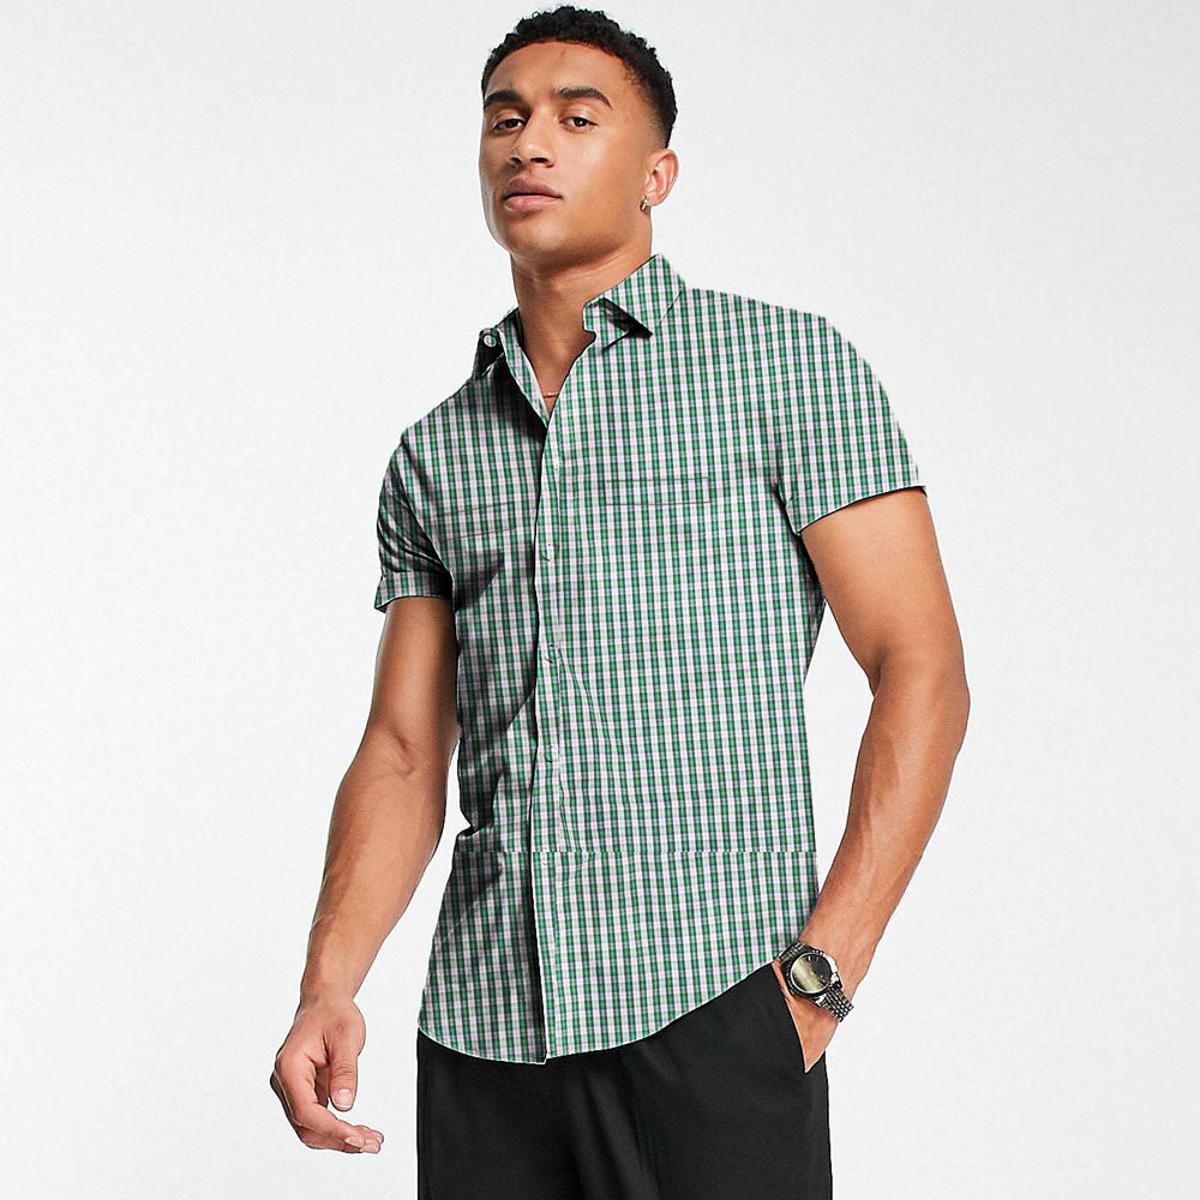 Elo Light Square Check Cut Label Long Sleeves Casual shirt for men